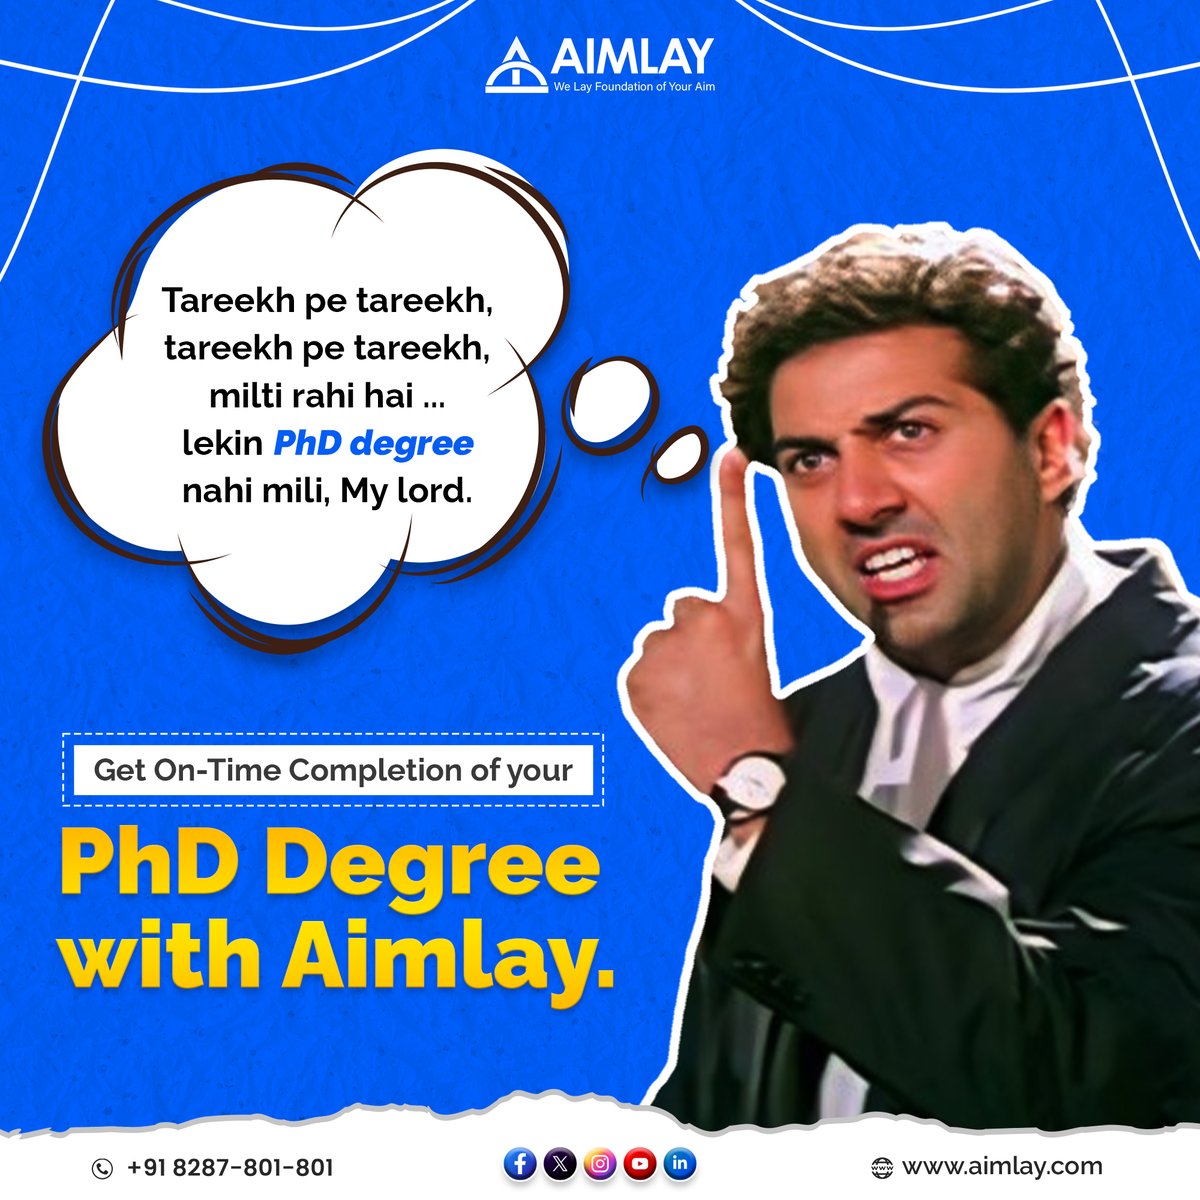 Tareekh pe tareekh, tareekh pe tareekh!
Still not getting your PhD degree on time?
Get on-time completion of your PhD degree with Aimlay. Our tailored support ensures you stay focused, and on track to achieve success in your life.
#phd #career #phdcareer #education #phddegree